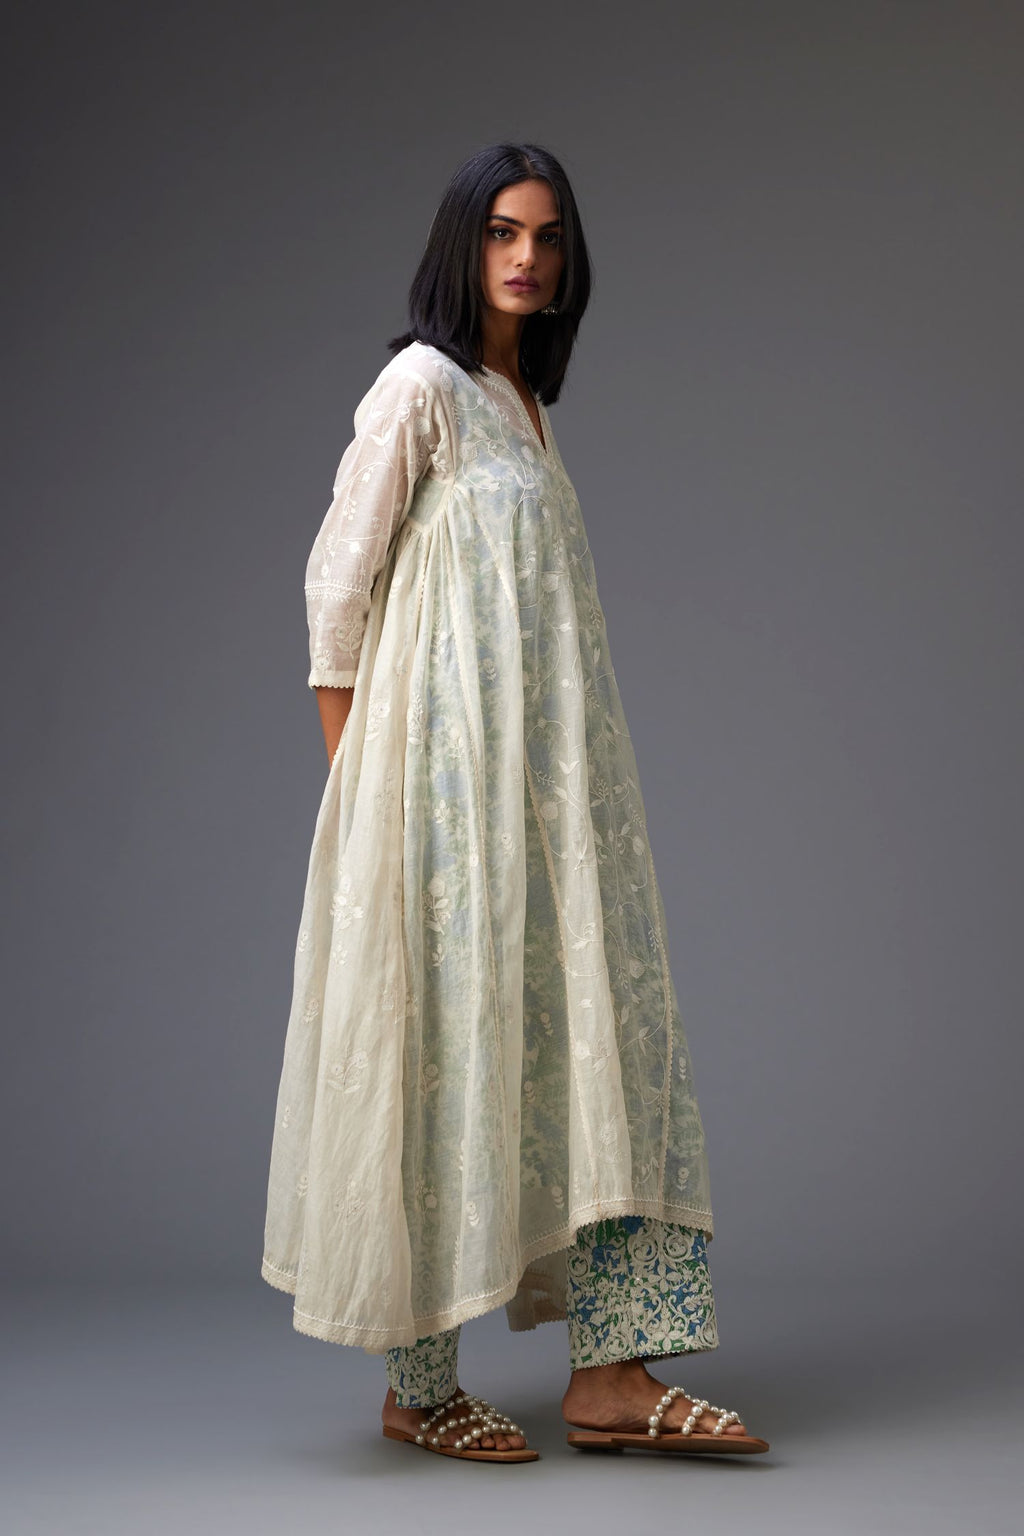 Off white cotton chanderi kurta set with asymmetric hem, highlighted with tonal colored thread embroidery and ric-rac lace at edges.